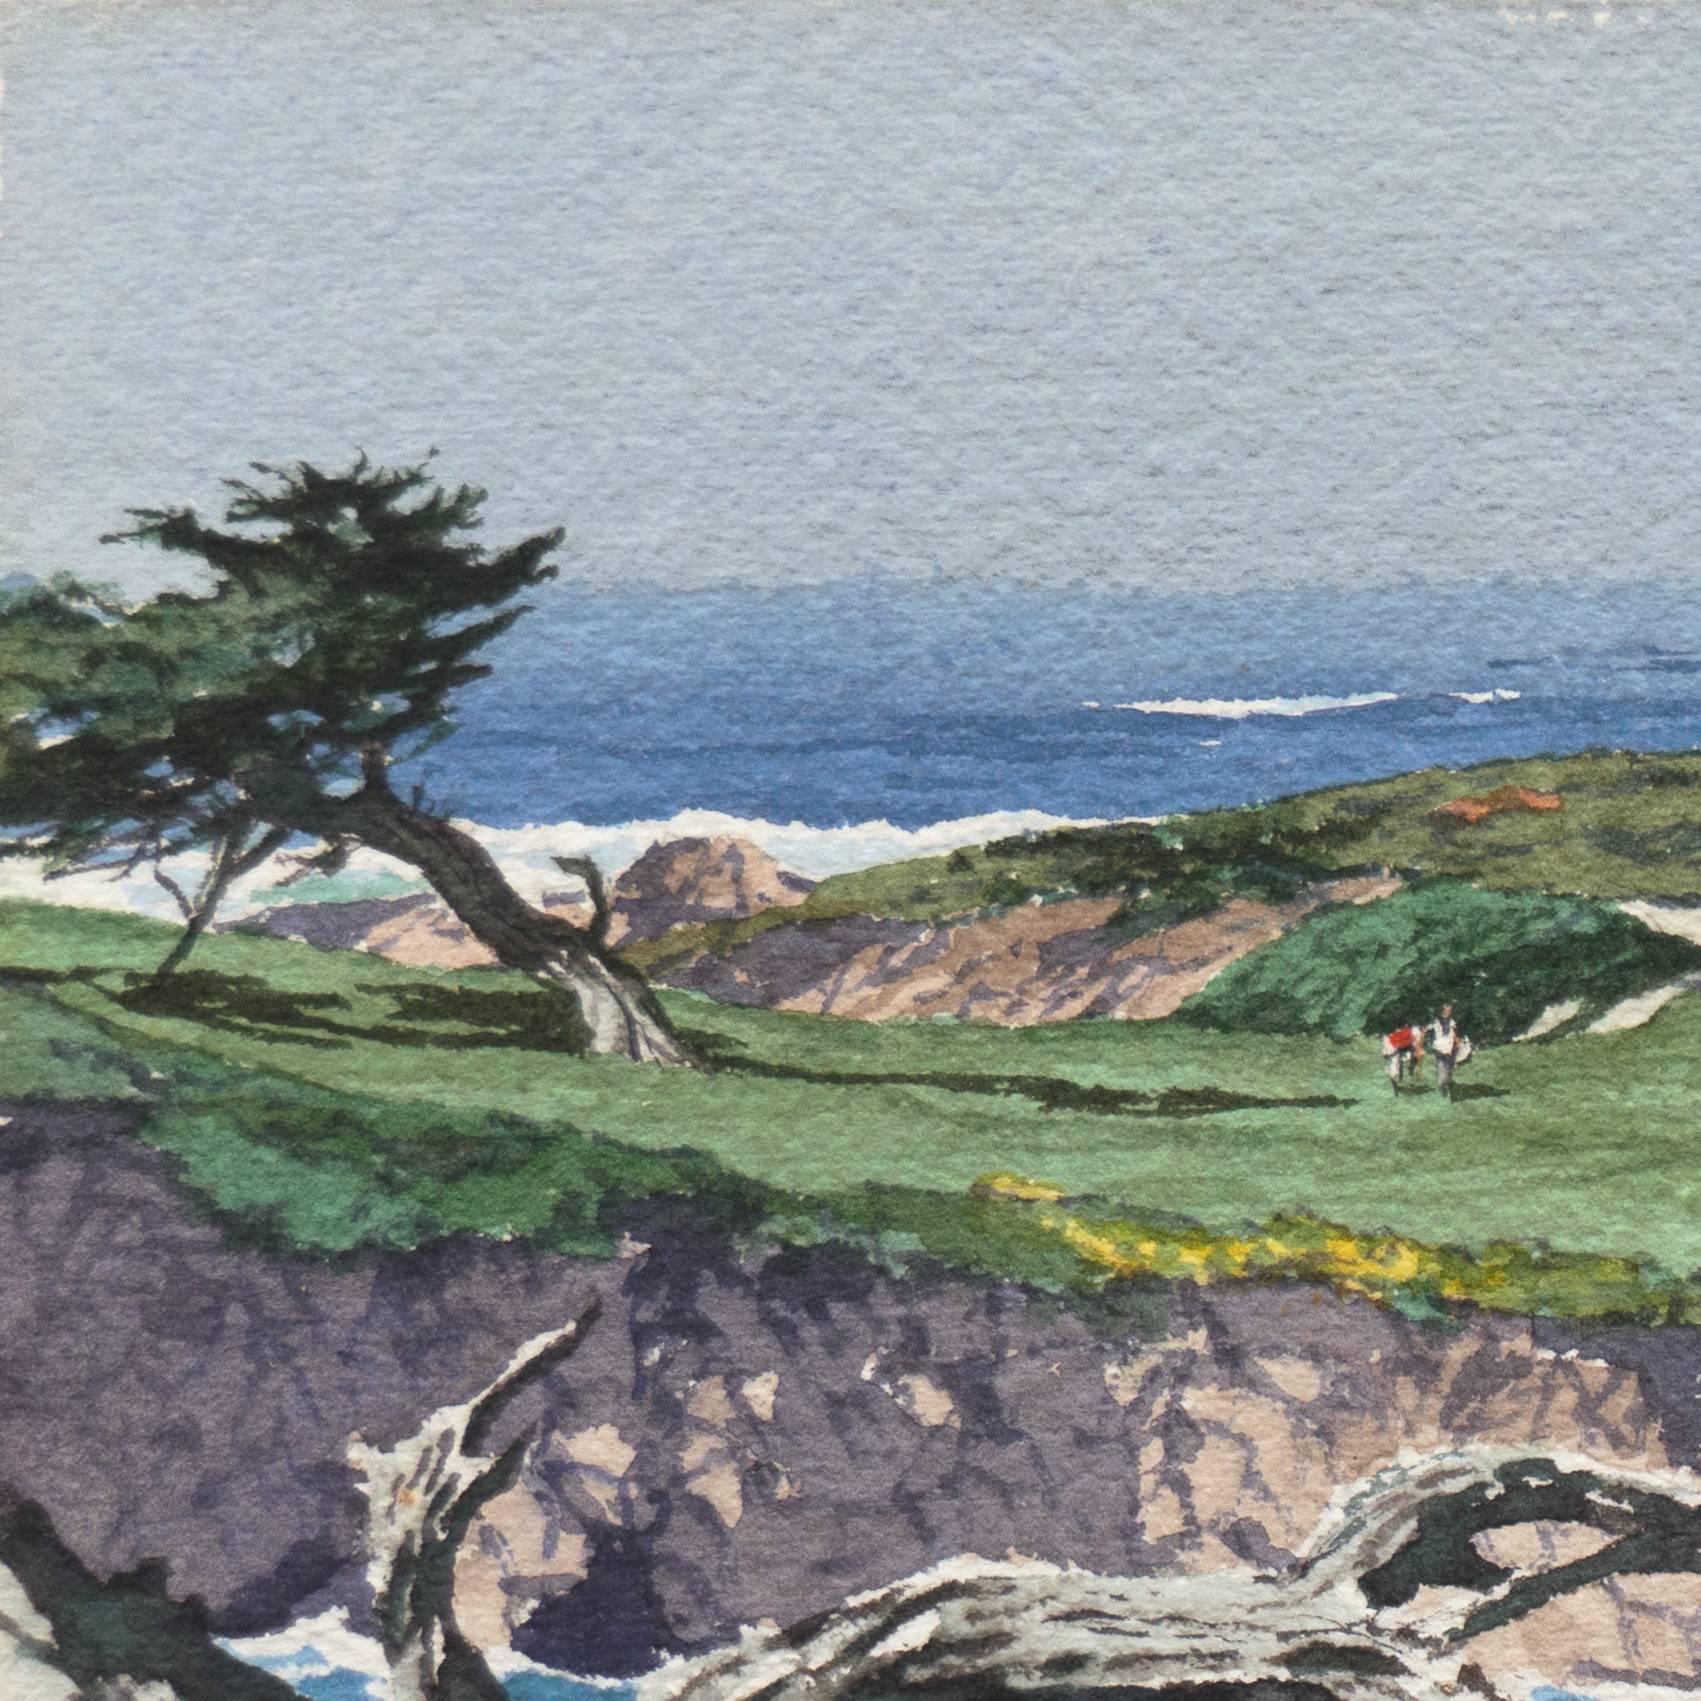 16th hole at cypress point